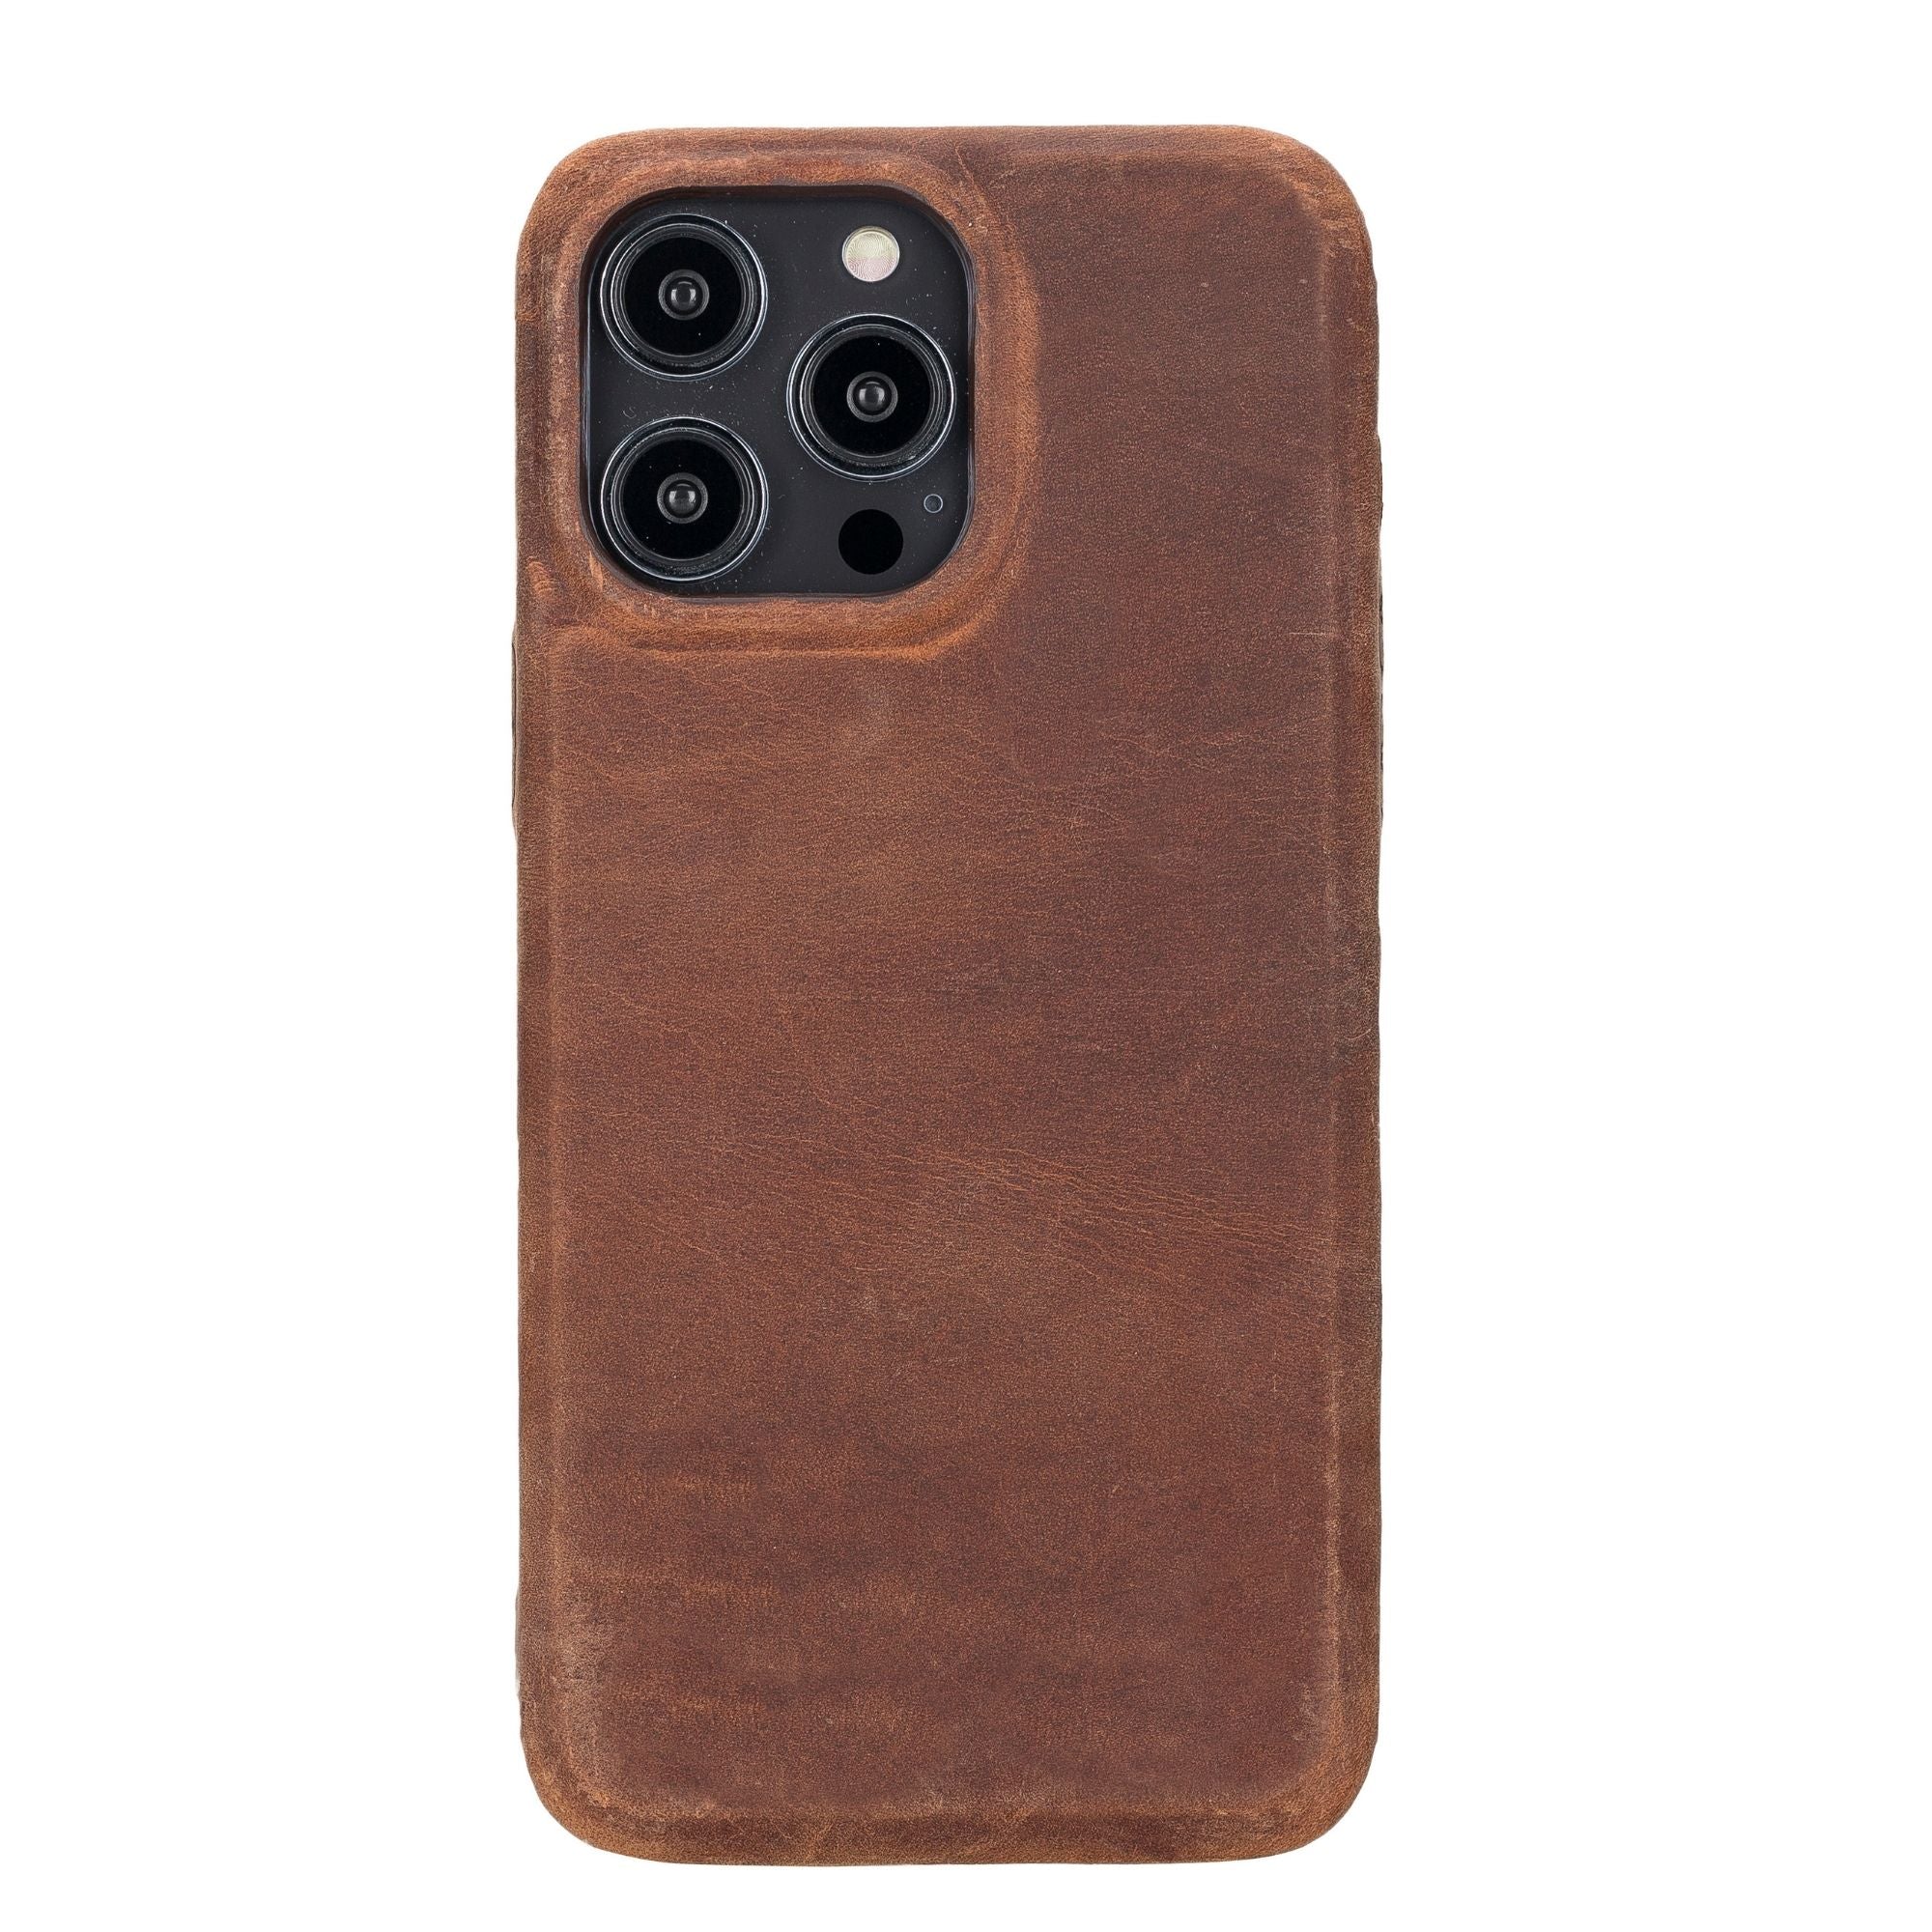 Pinedale Leather Snap-on Case for iPhone 12 Series - iPhone 12 Pro Max - Dark Brown - TORONATA